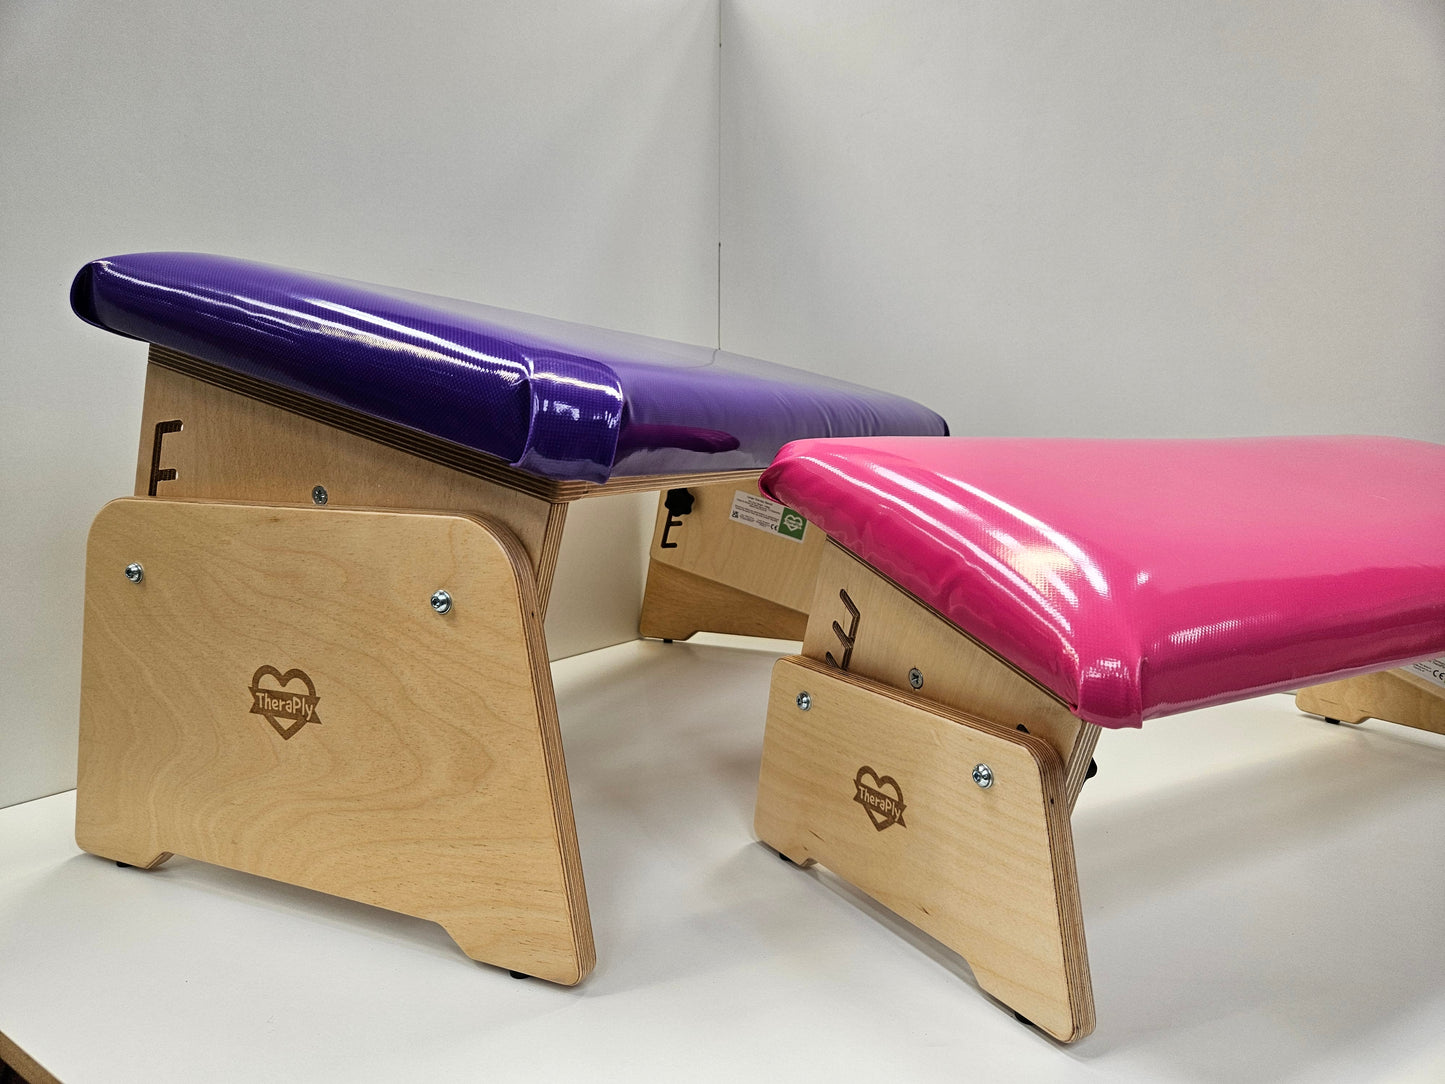 Purple and Pink TheraPly therapy benches